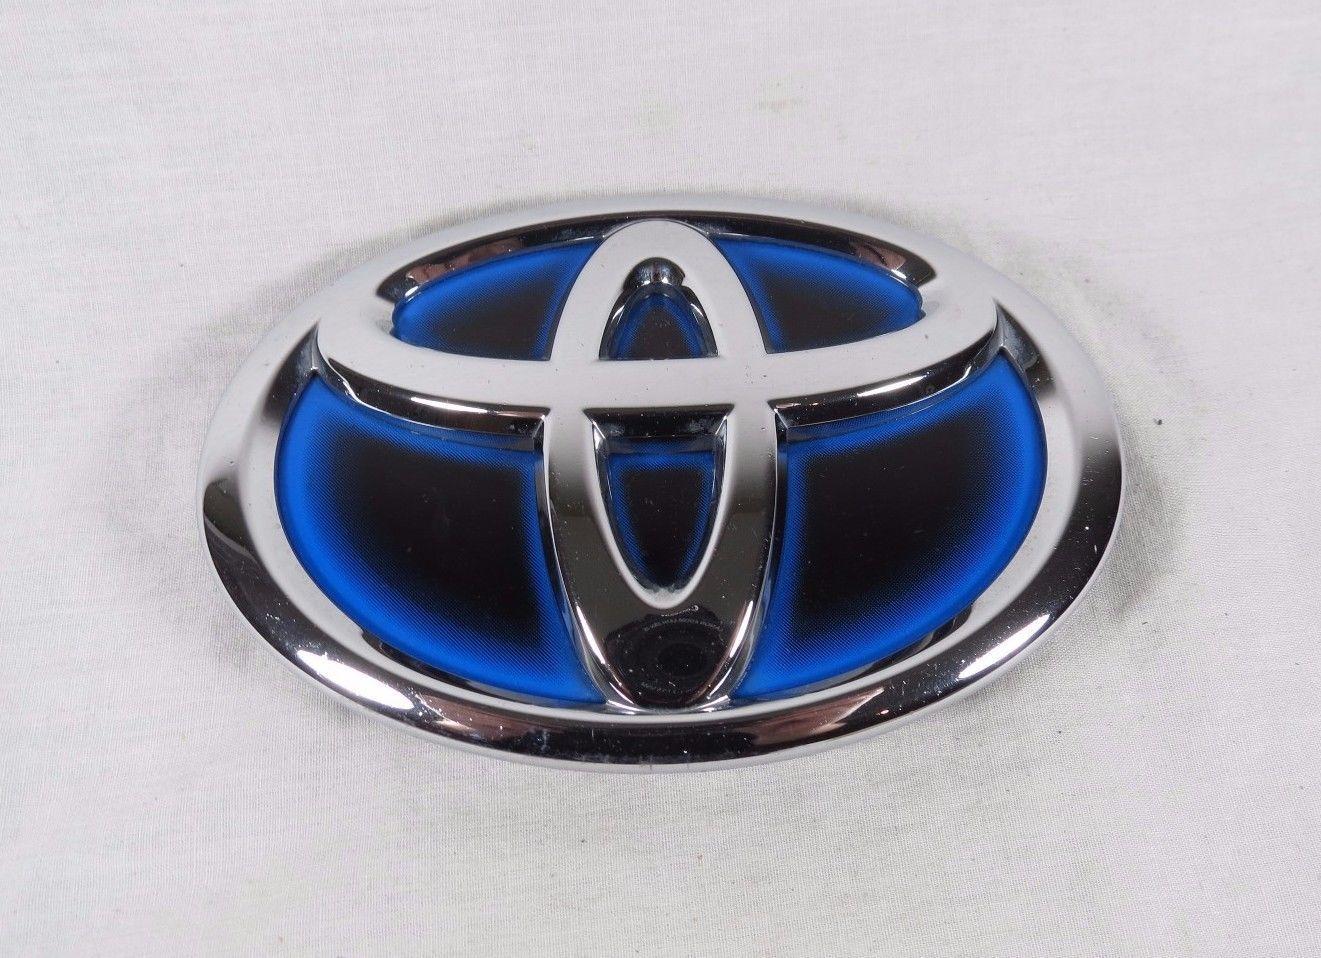 2018 Toyota Logo - Cool Great TOYOTA HYBRID GRILLE EMBLEM PRIUS CAMRY GENUINE OEM GRILL